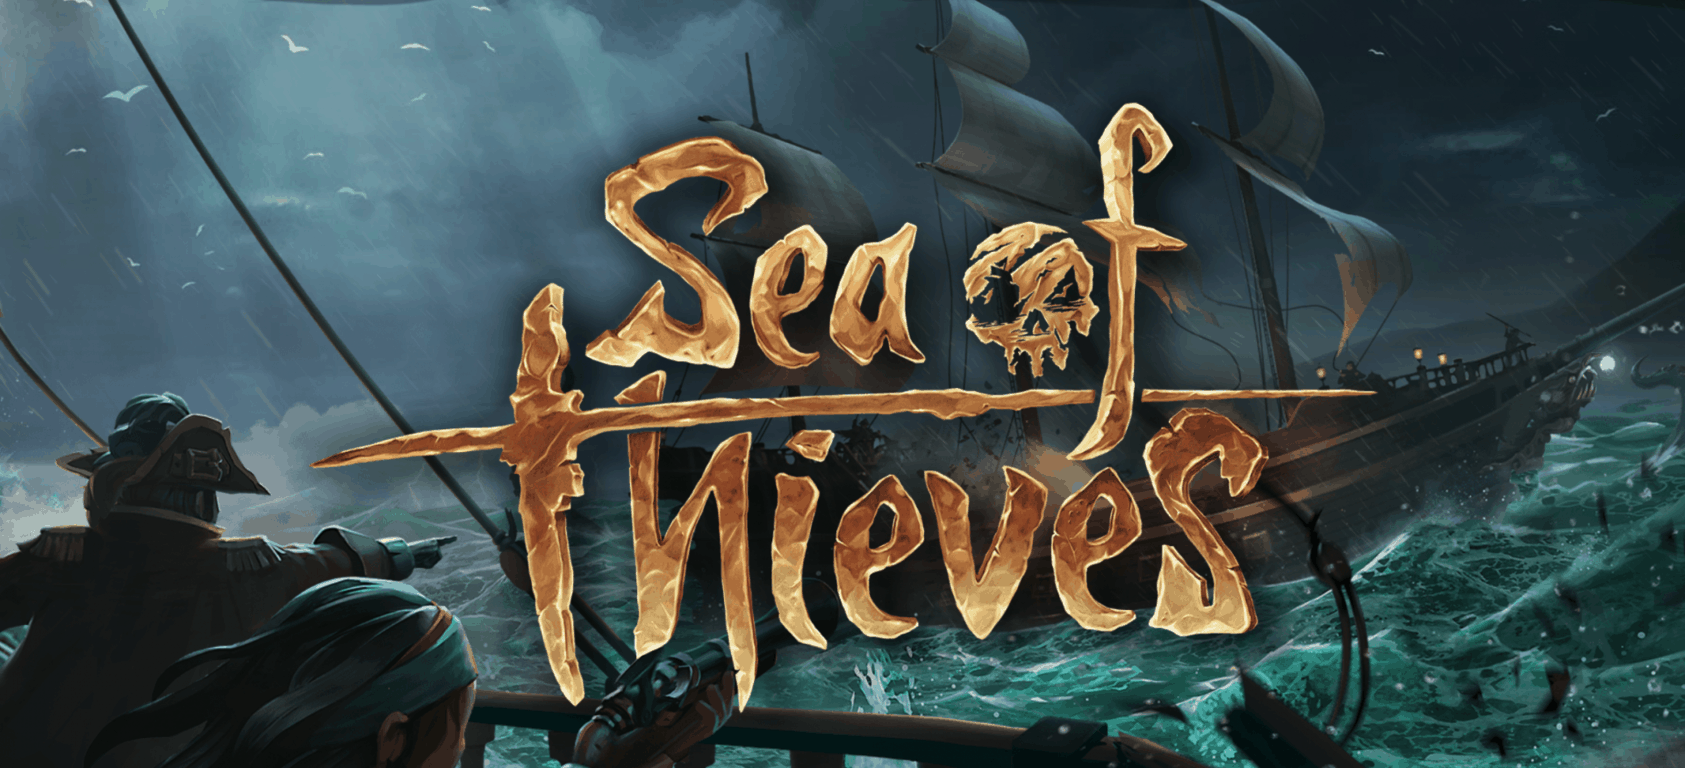 Sea of thieves will have its first technical alpha play weekend starting december 16 - onmsft. Com - december 8, 2016